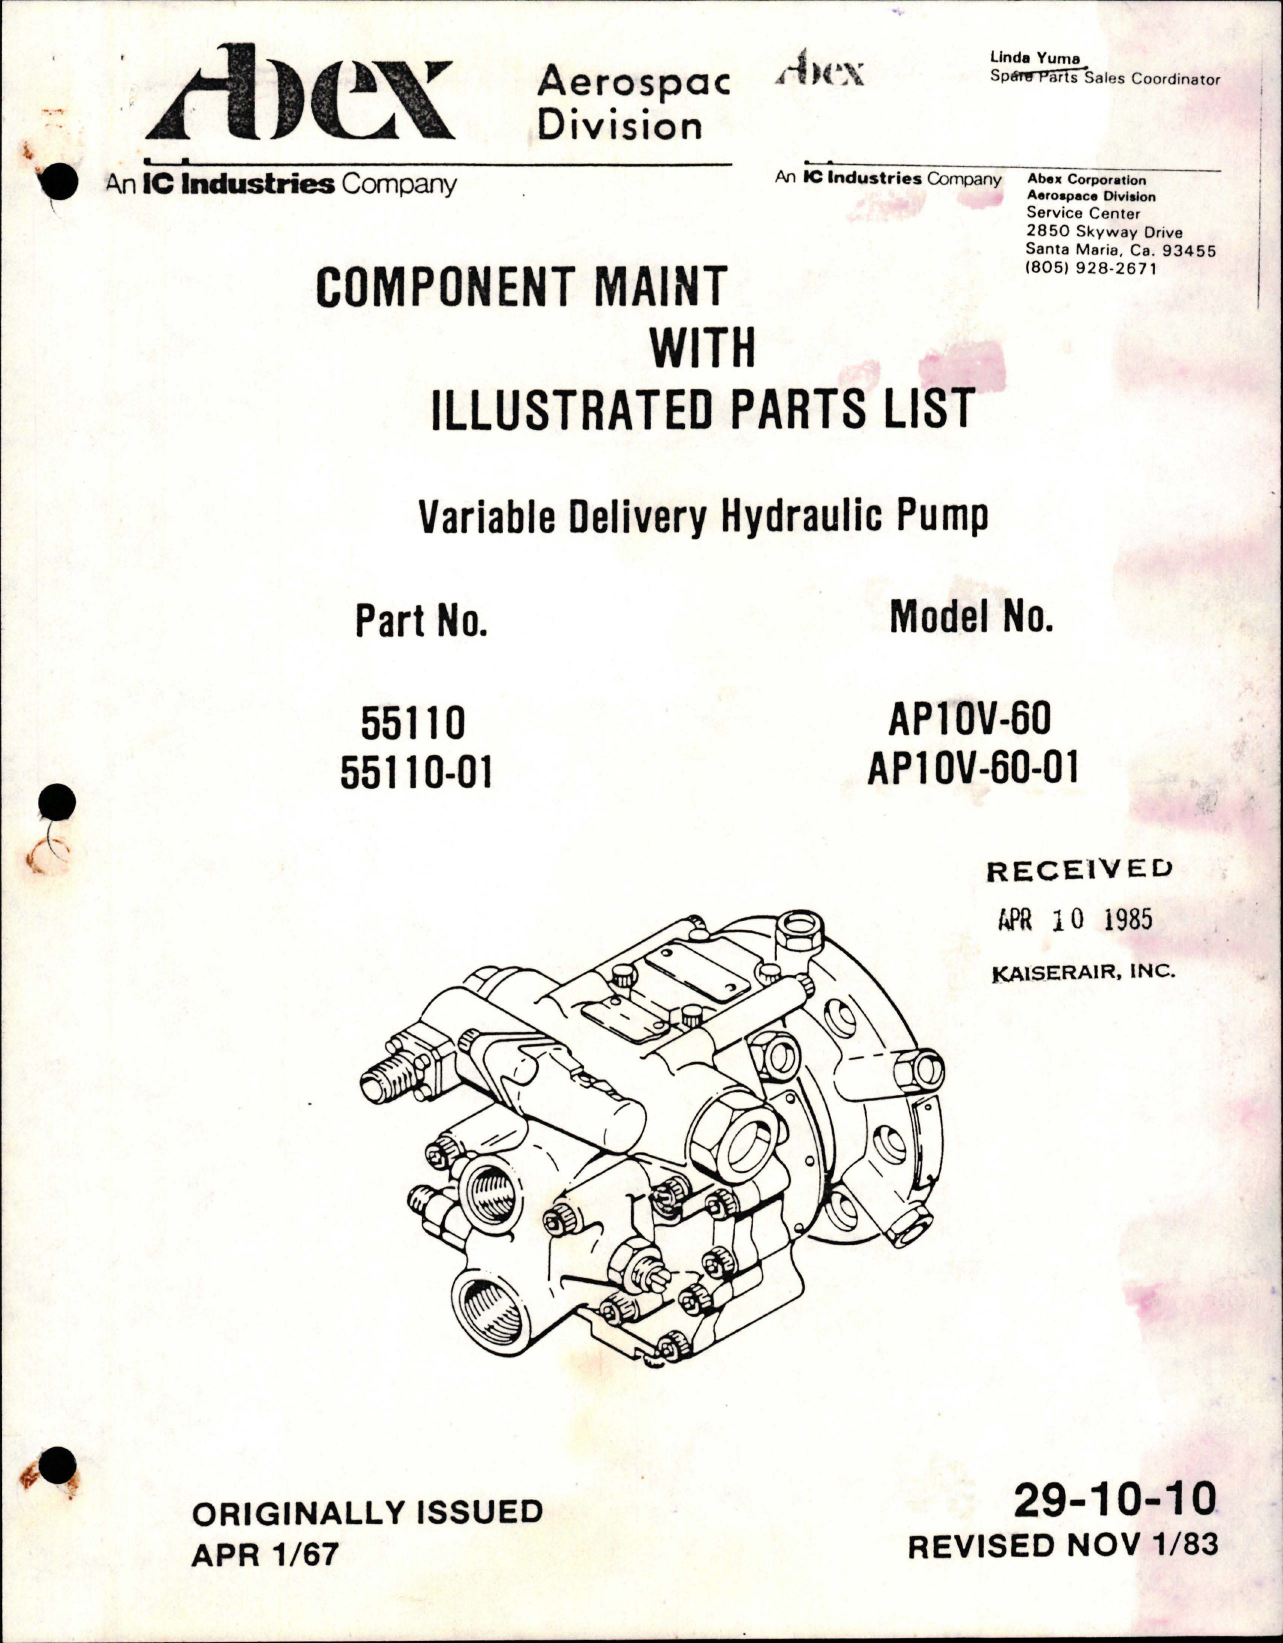 Sample page 1 from AirCorps Library document: Maintenance with Illustrated Parts List for Variable Delivery Hydraulic Pump - Part 55110, 55110-01